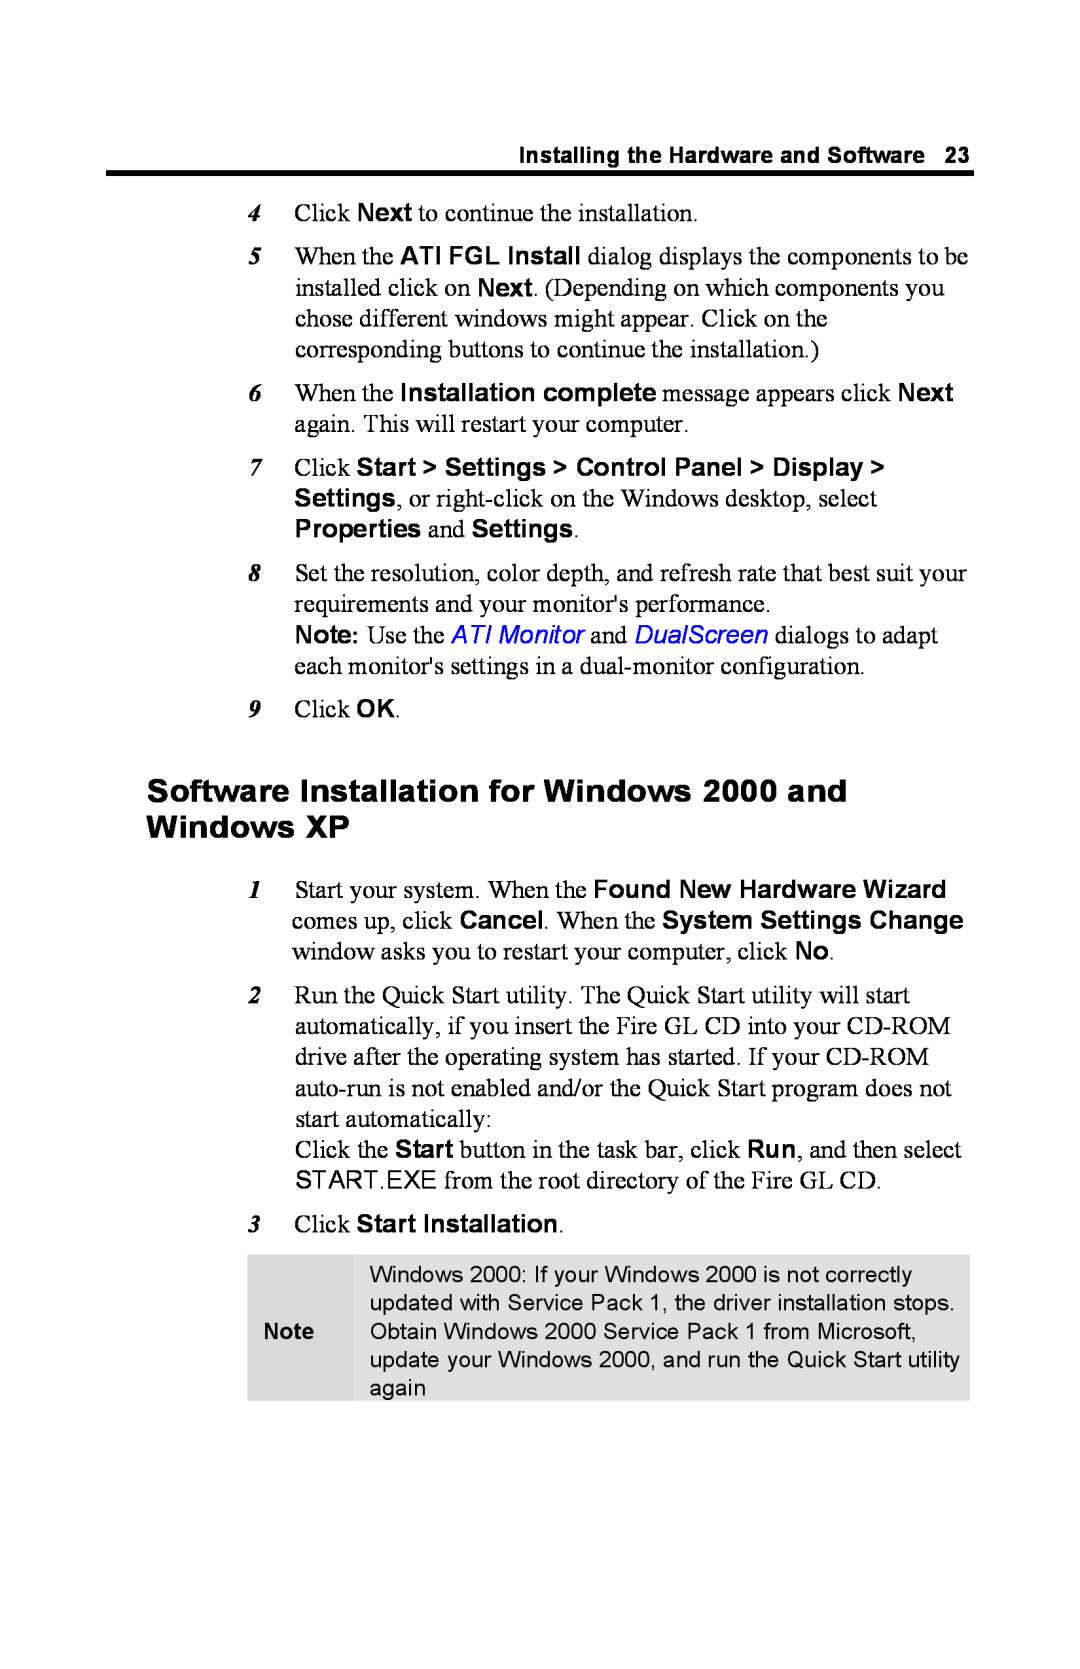 ATI Technologies GL 8800 specifications Software Installation for Windows 2000 and Windows XP, Properties and Settings 